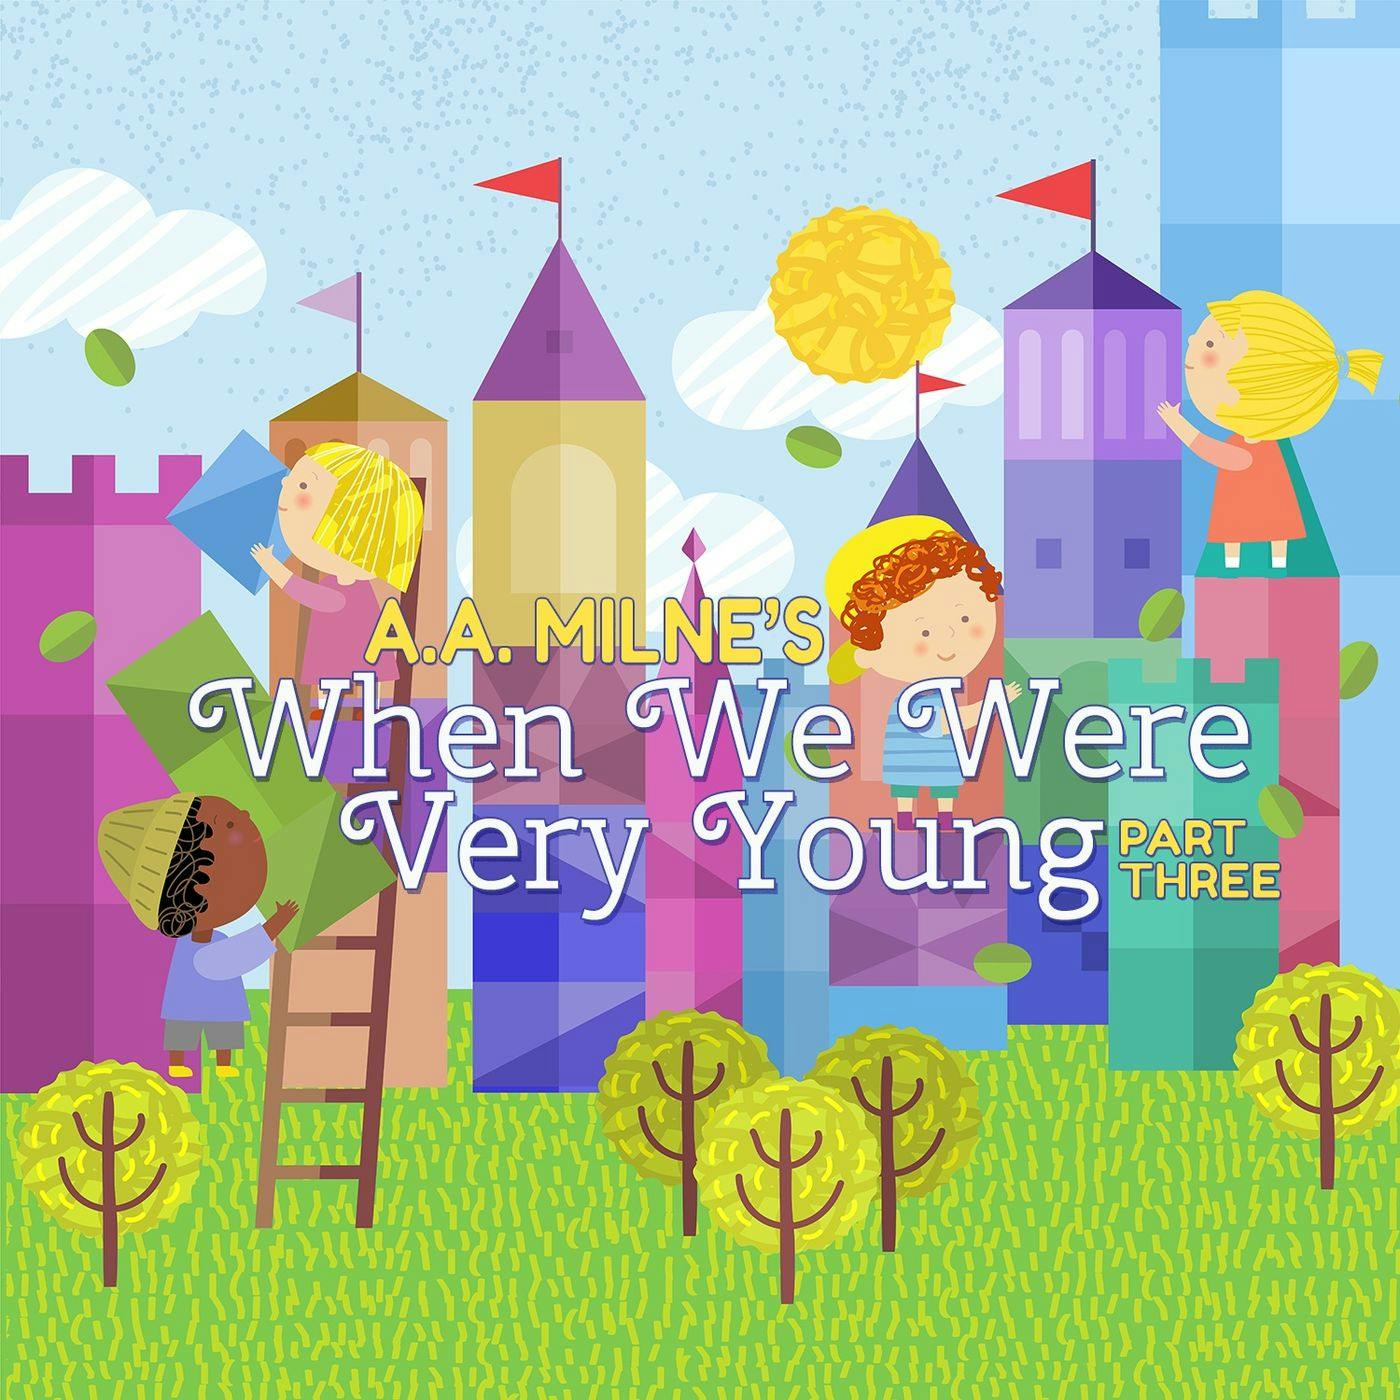 When We Were Very Young - Part Three by A. A. Milne